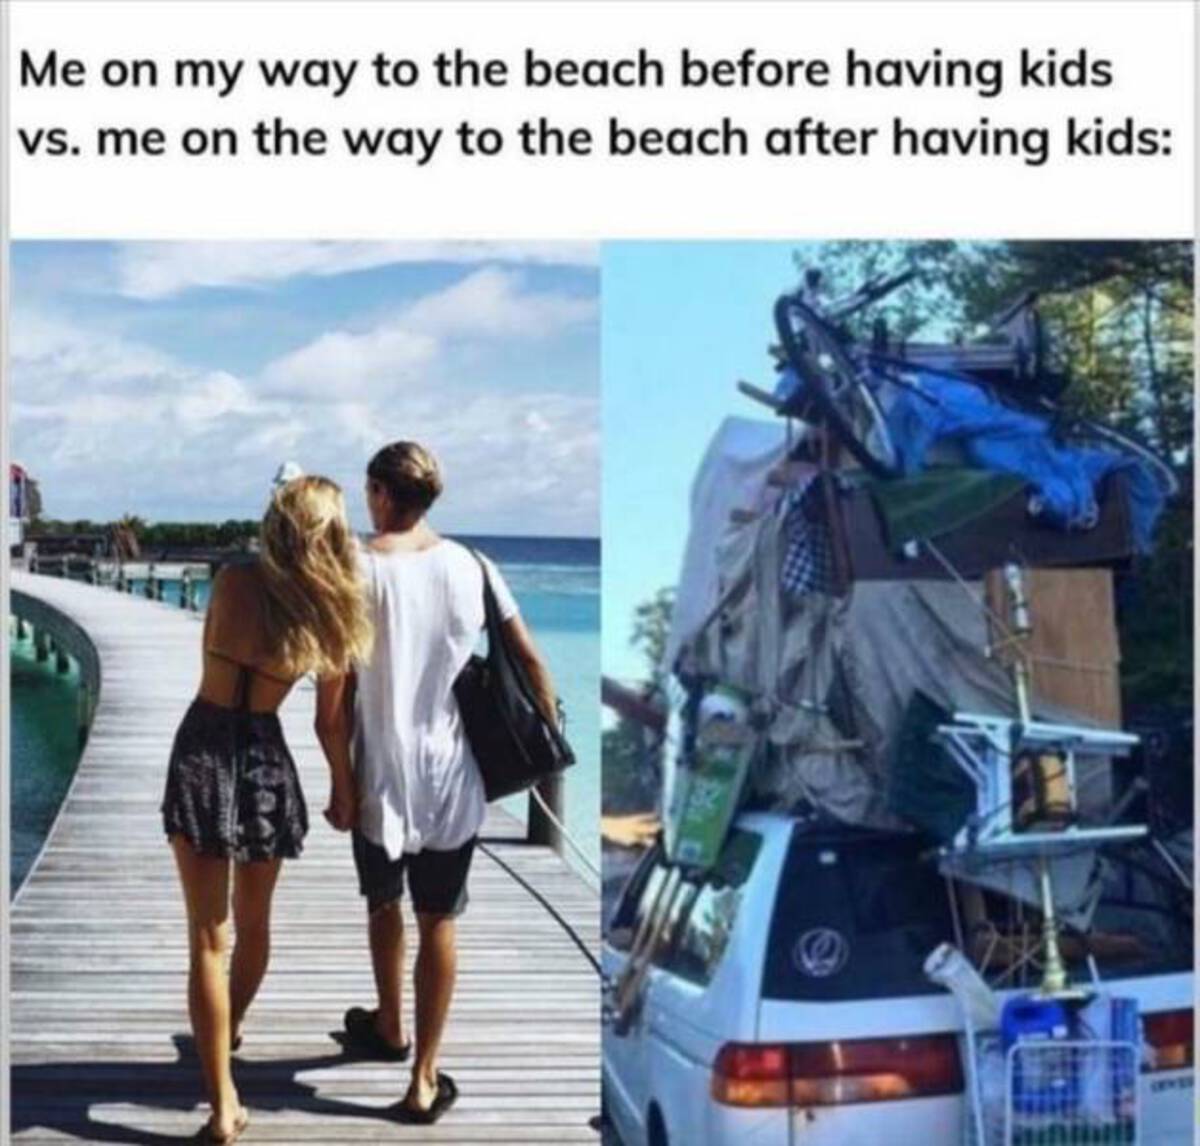 car stacked high - Me on my way to the beach before having kids vs. me on the way to the beach after having kids